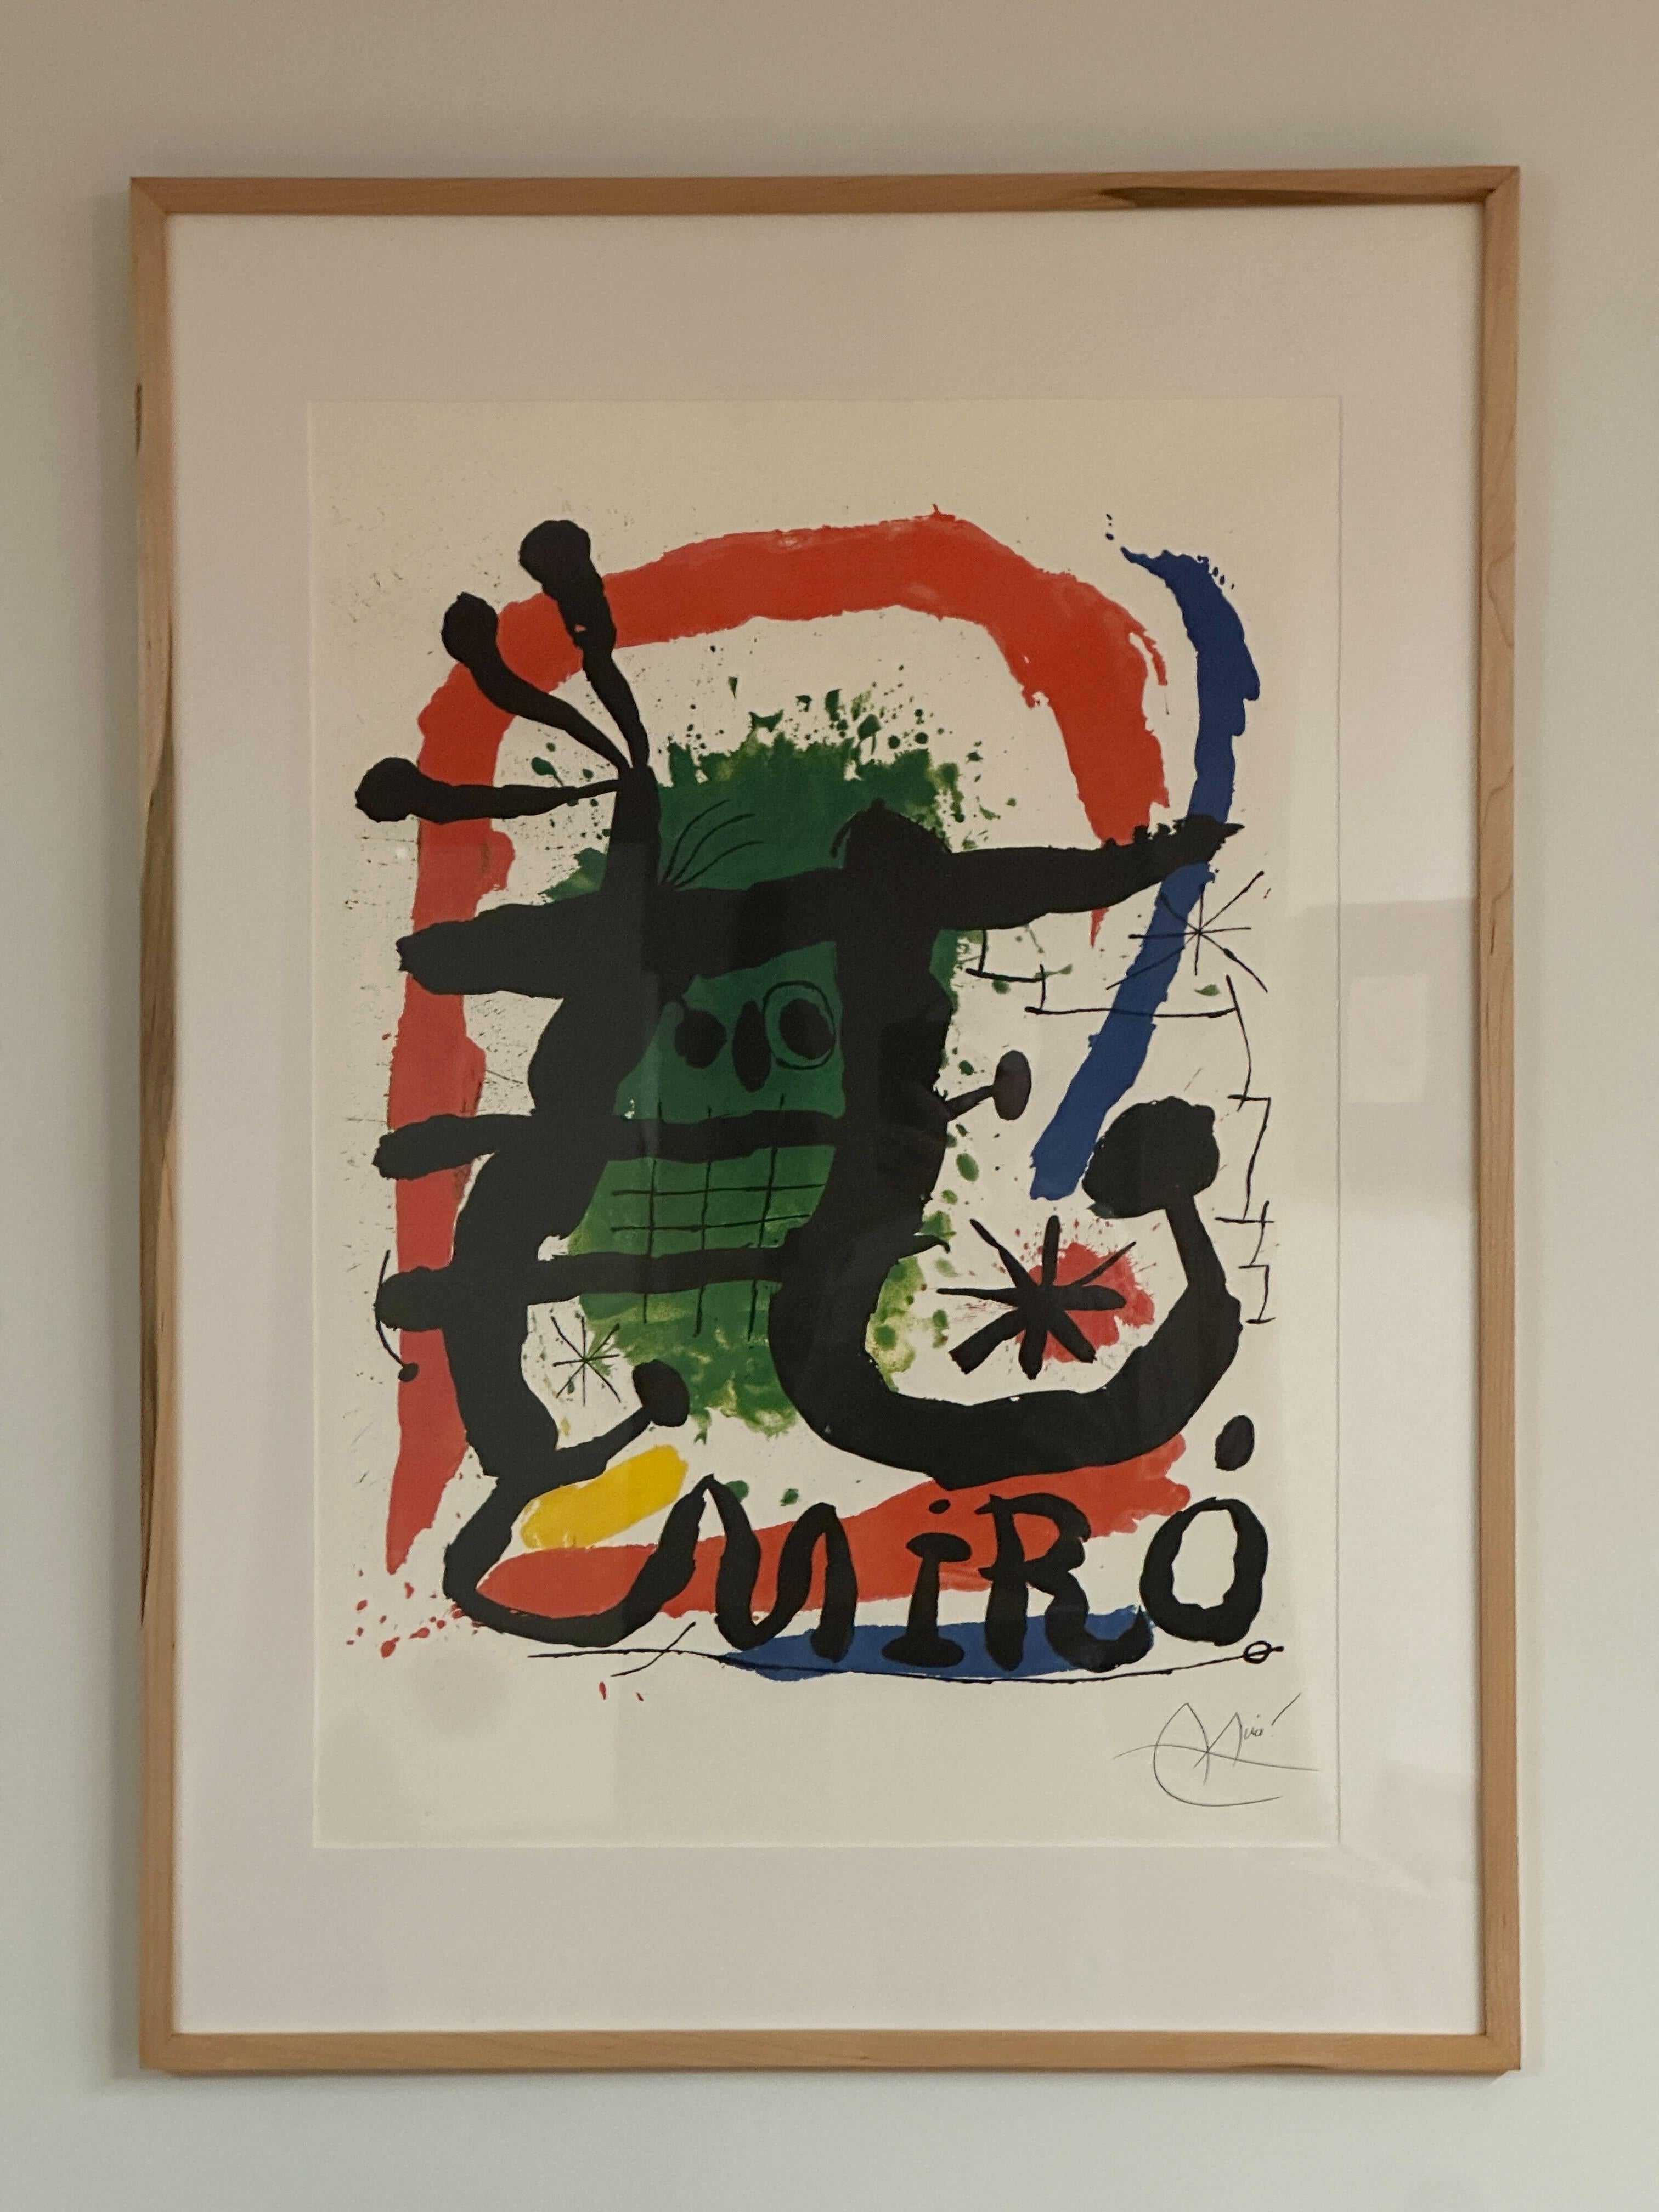 Spanish Miro Lithograph in colors - estate 'after' release plate signed  For Sale